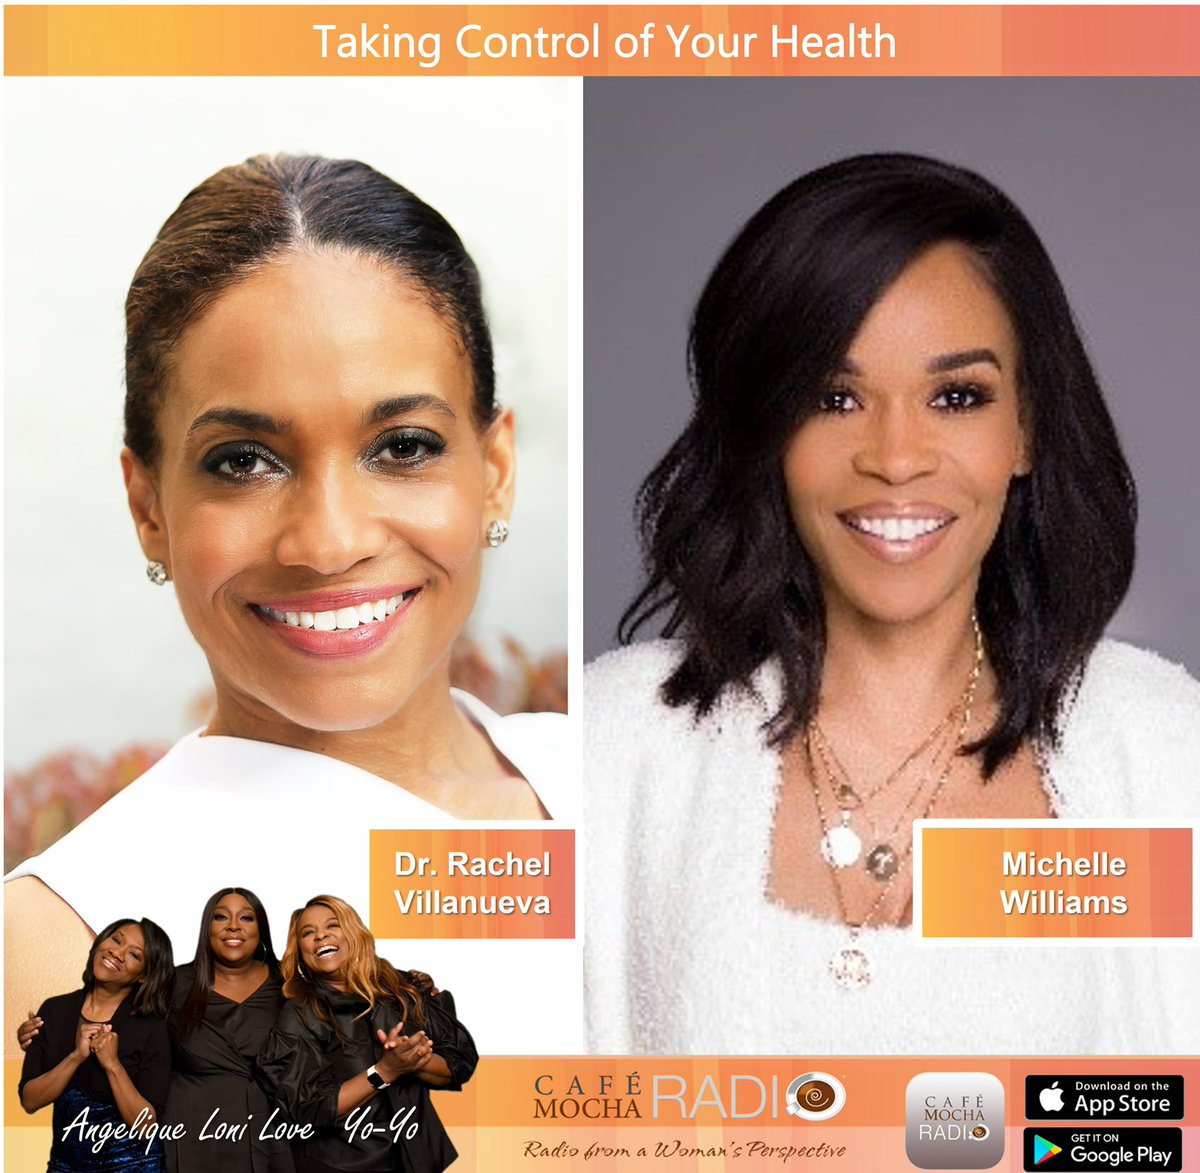 Cafe Mocha is addressing physical and mental health. NYU's @DrRachelSays answers our questions and addresses the myths around the Covid-19 vaccine. Plus, @RealMichelleW of Destiny's Child talks about protecting our mental health. #MentalHealthAwareness #CafeMochaRadio